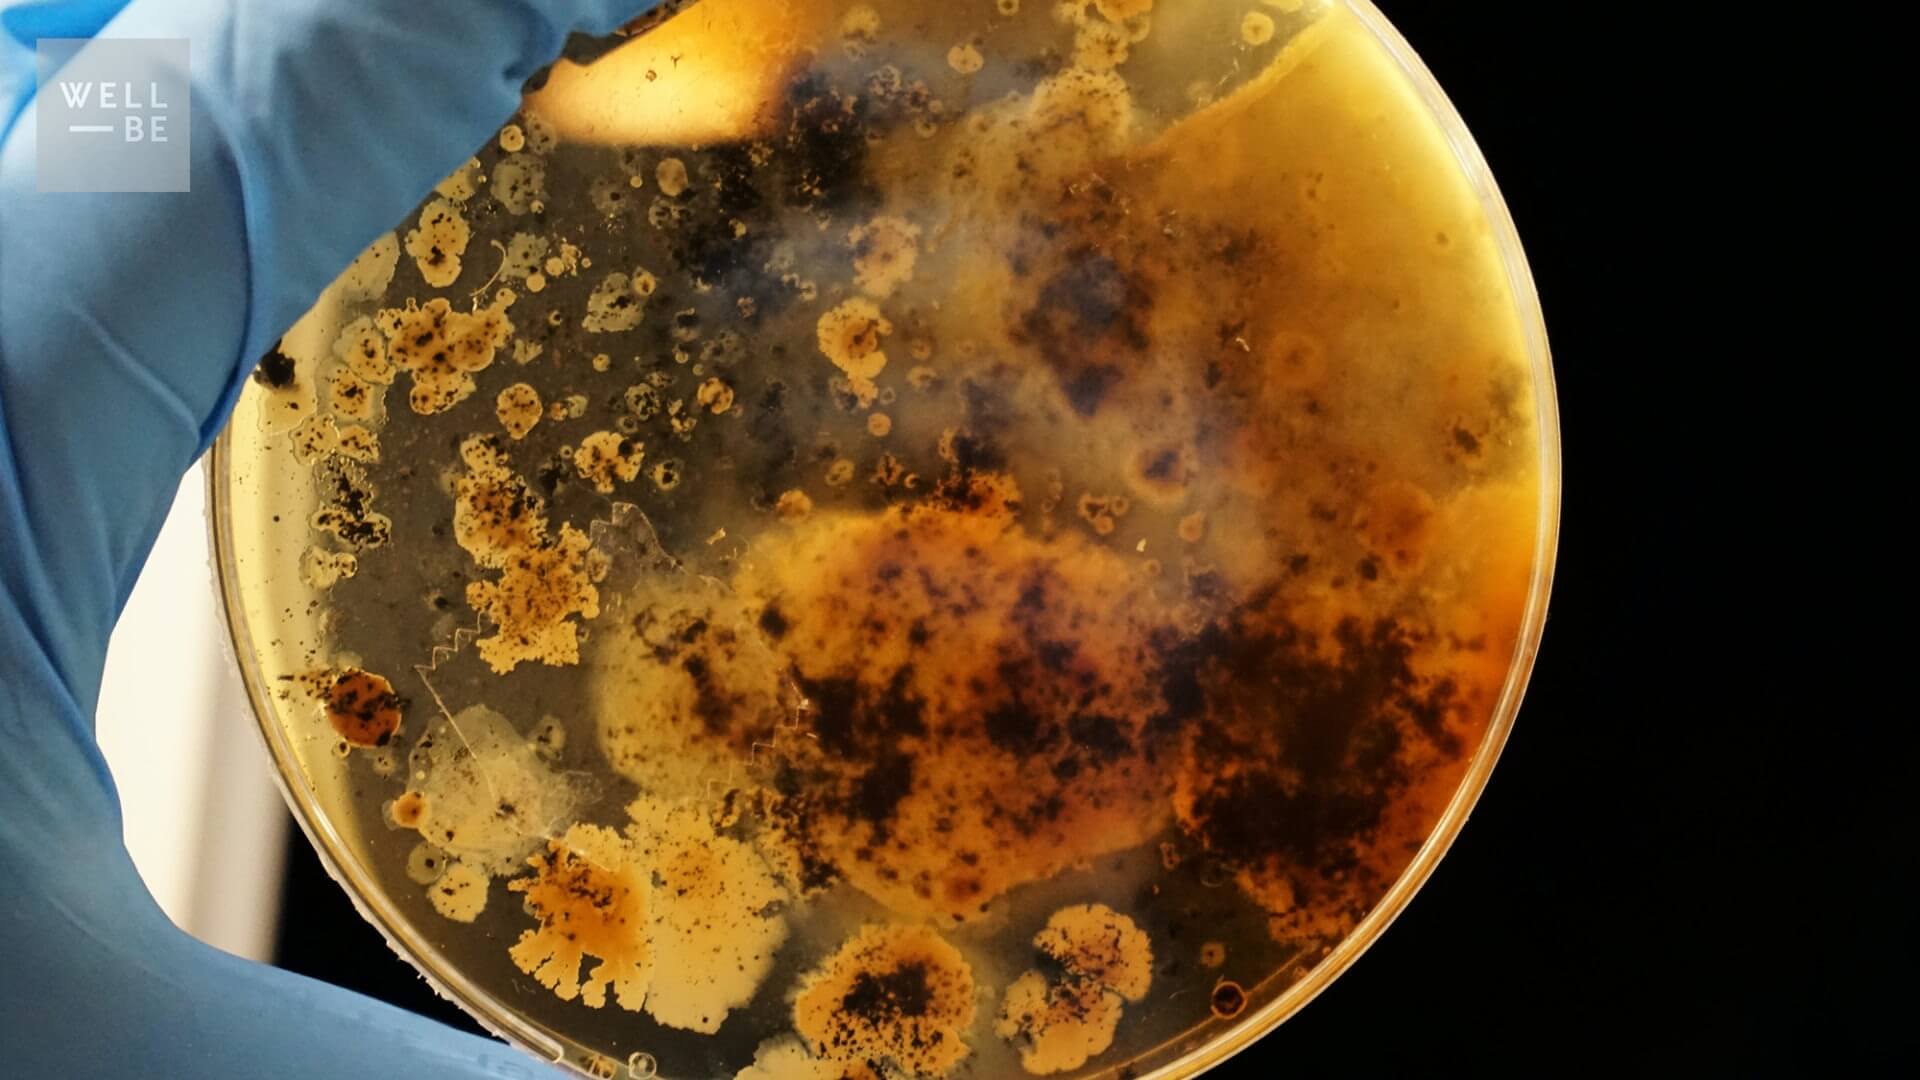 candida in stool